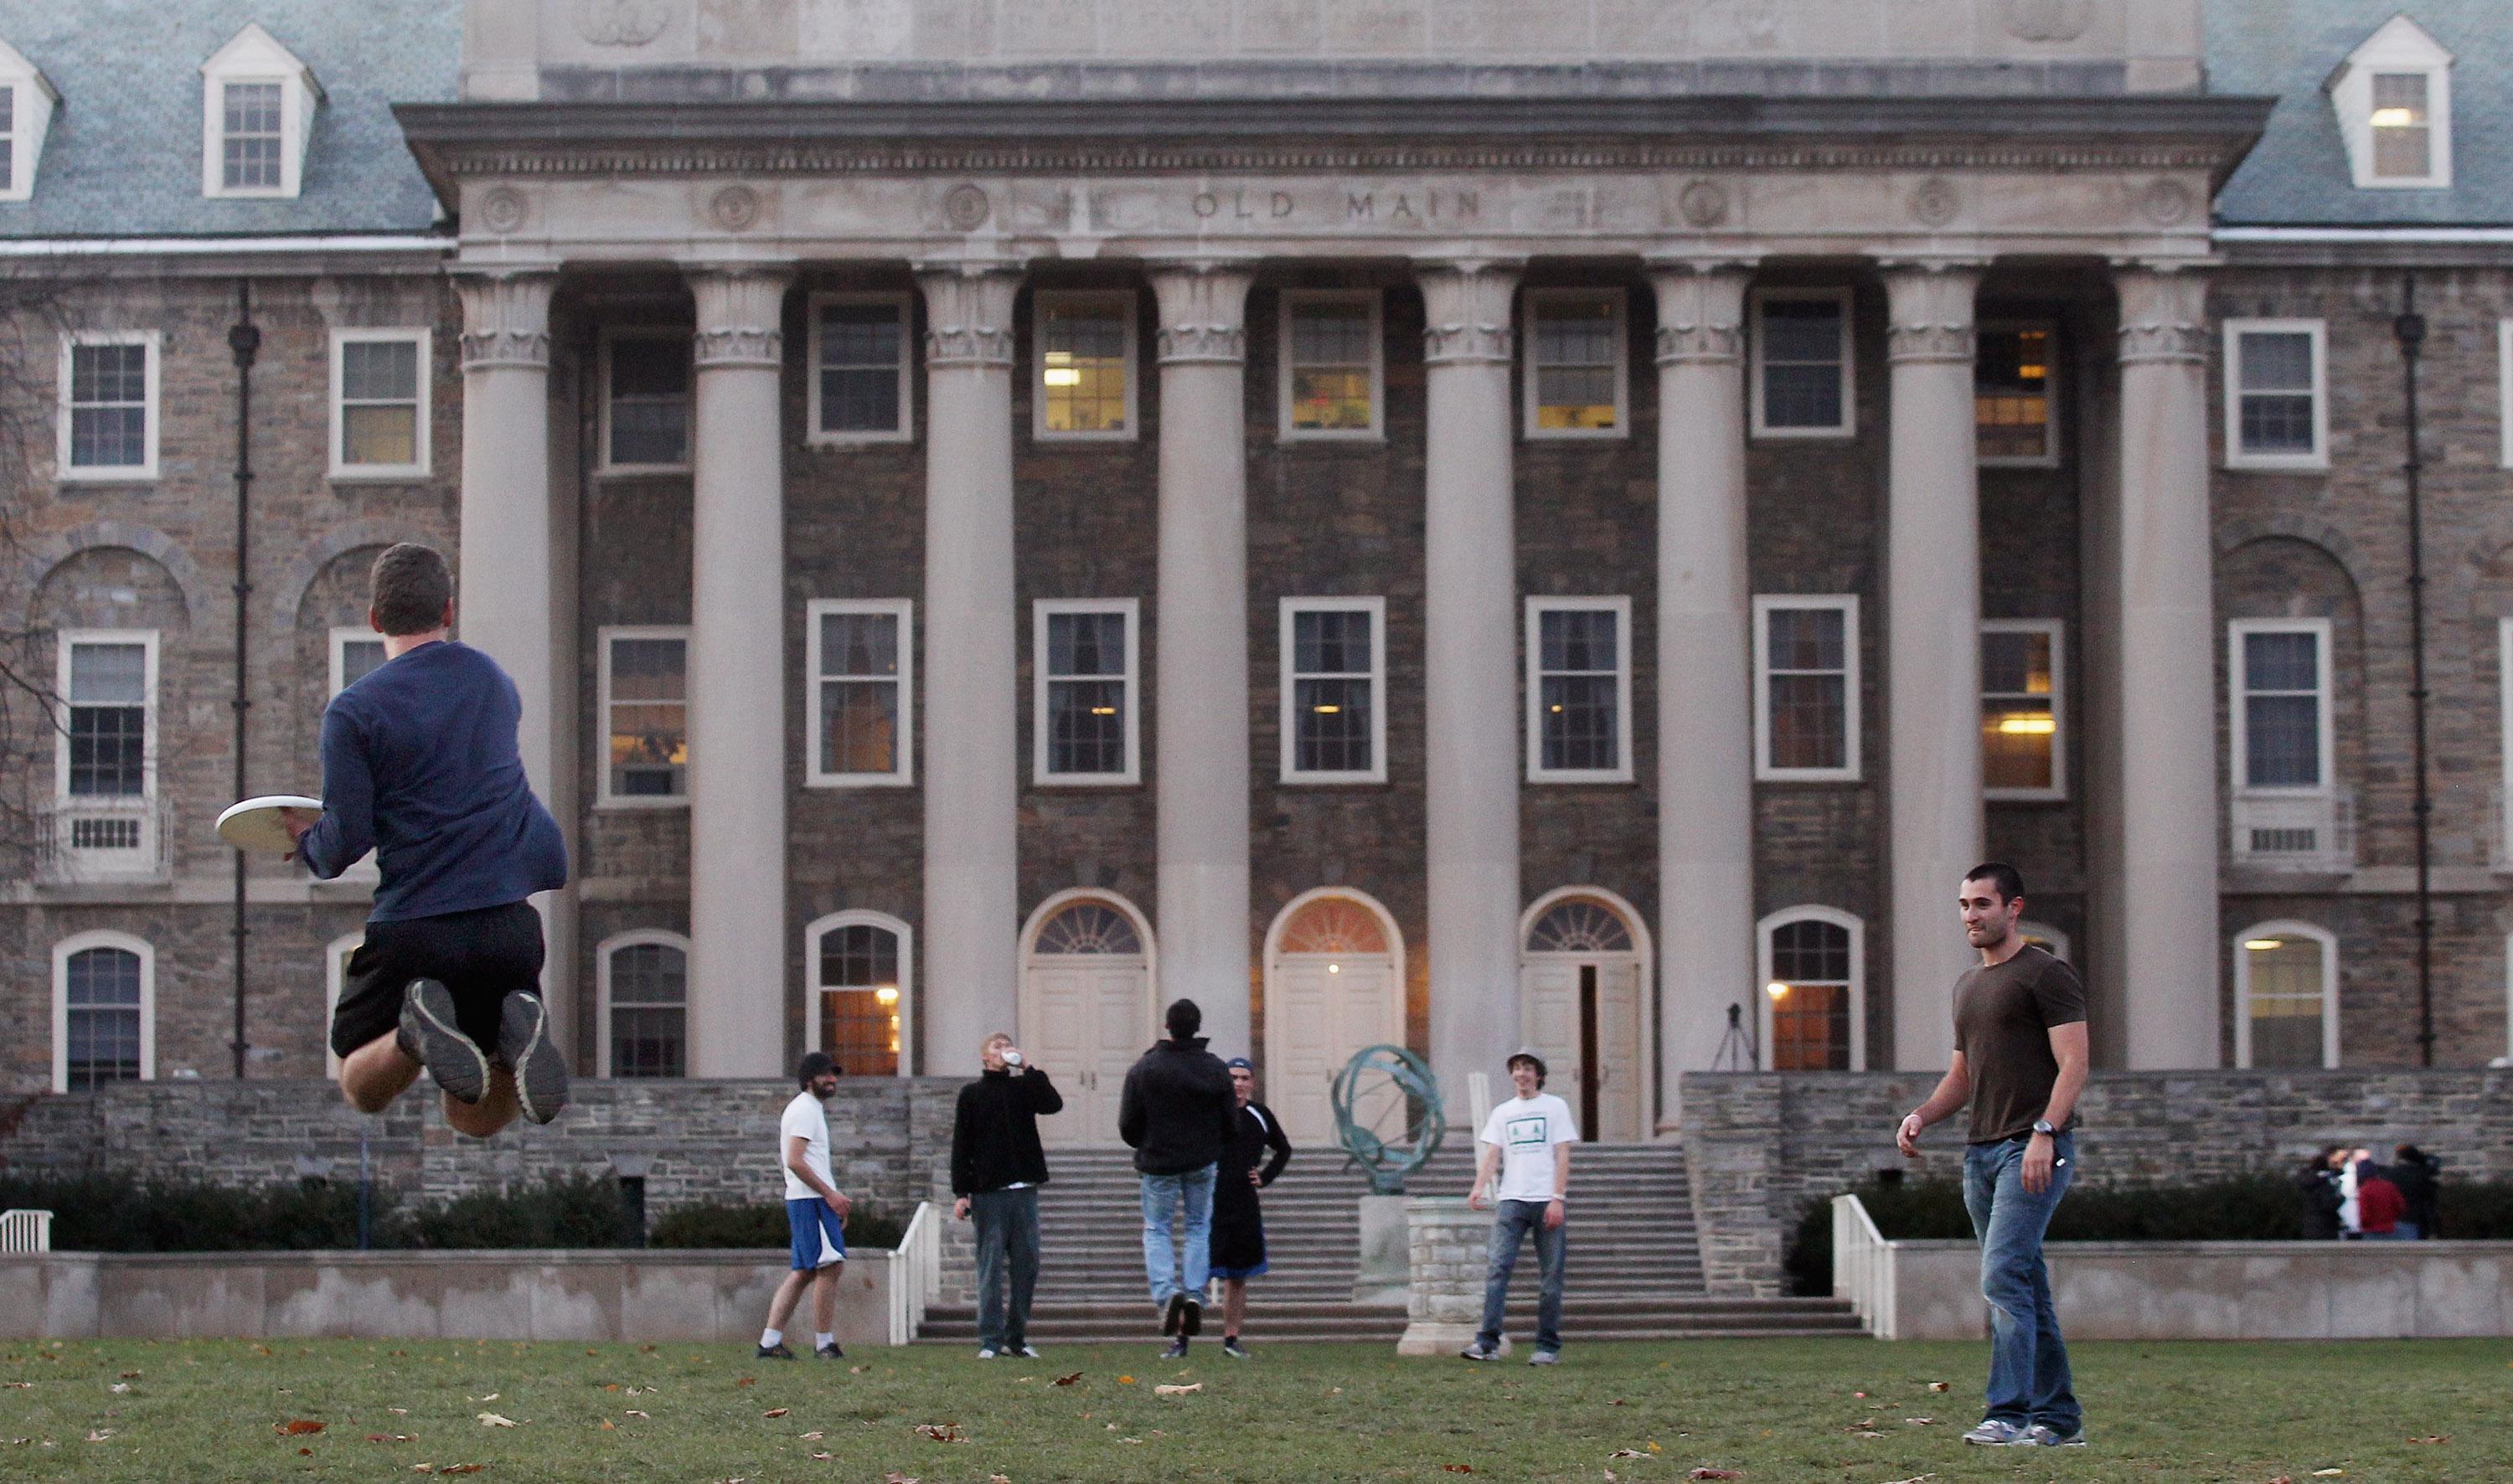 Kappa Delta Rho fraternity at Penn State Pictures of non-consenting nude women image